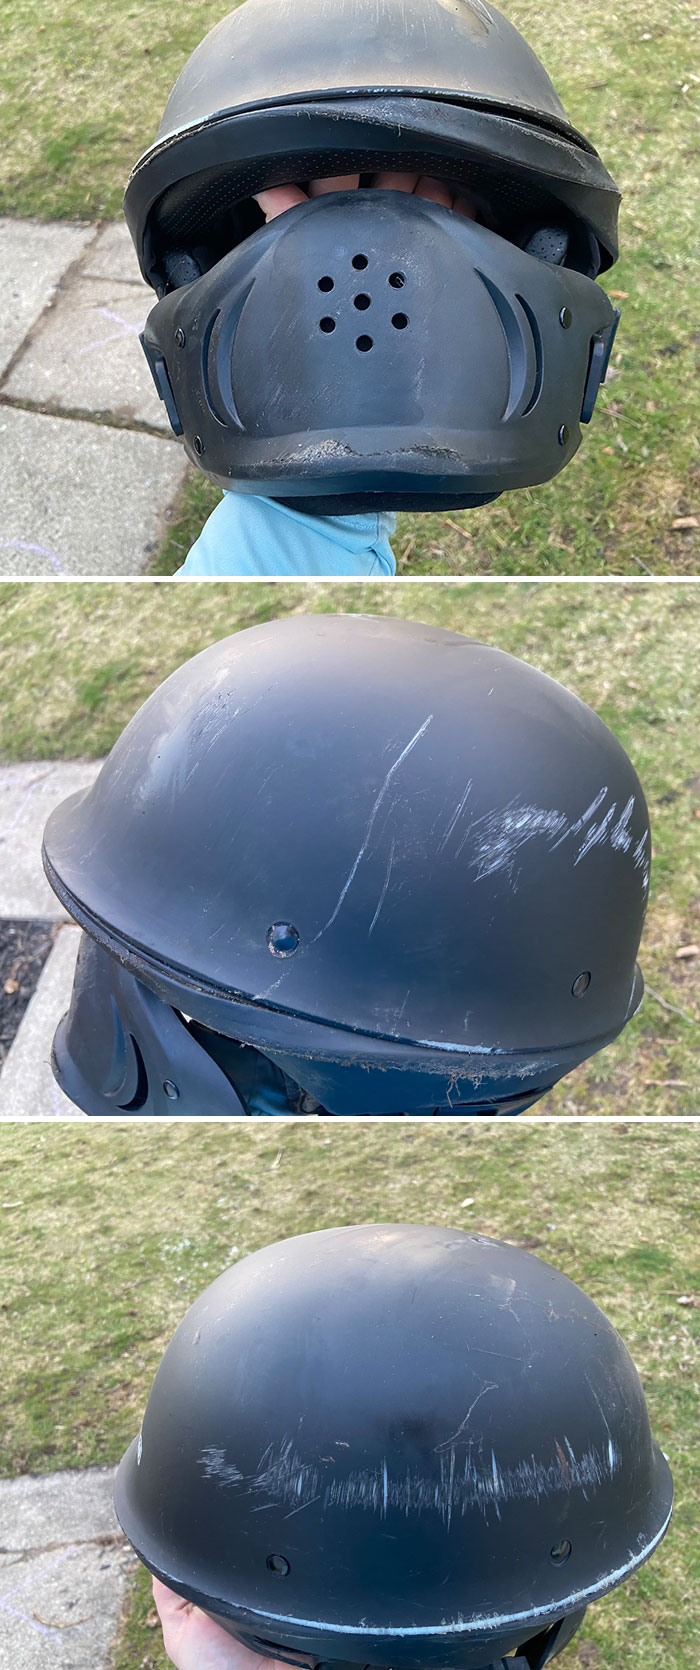 Two Years Ago Today, This Dot Certified Helmet Absorbed A 50mph Impact And Saved My Life